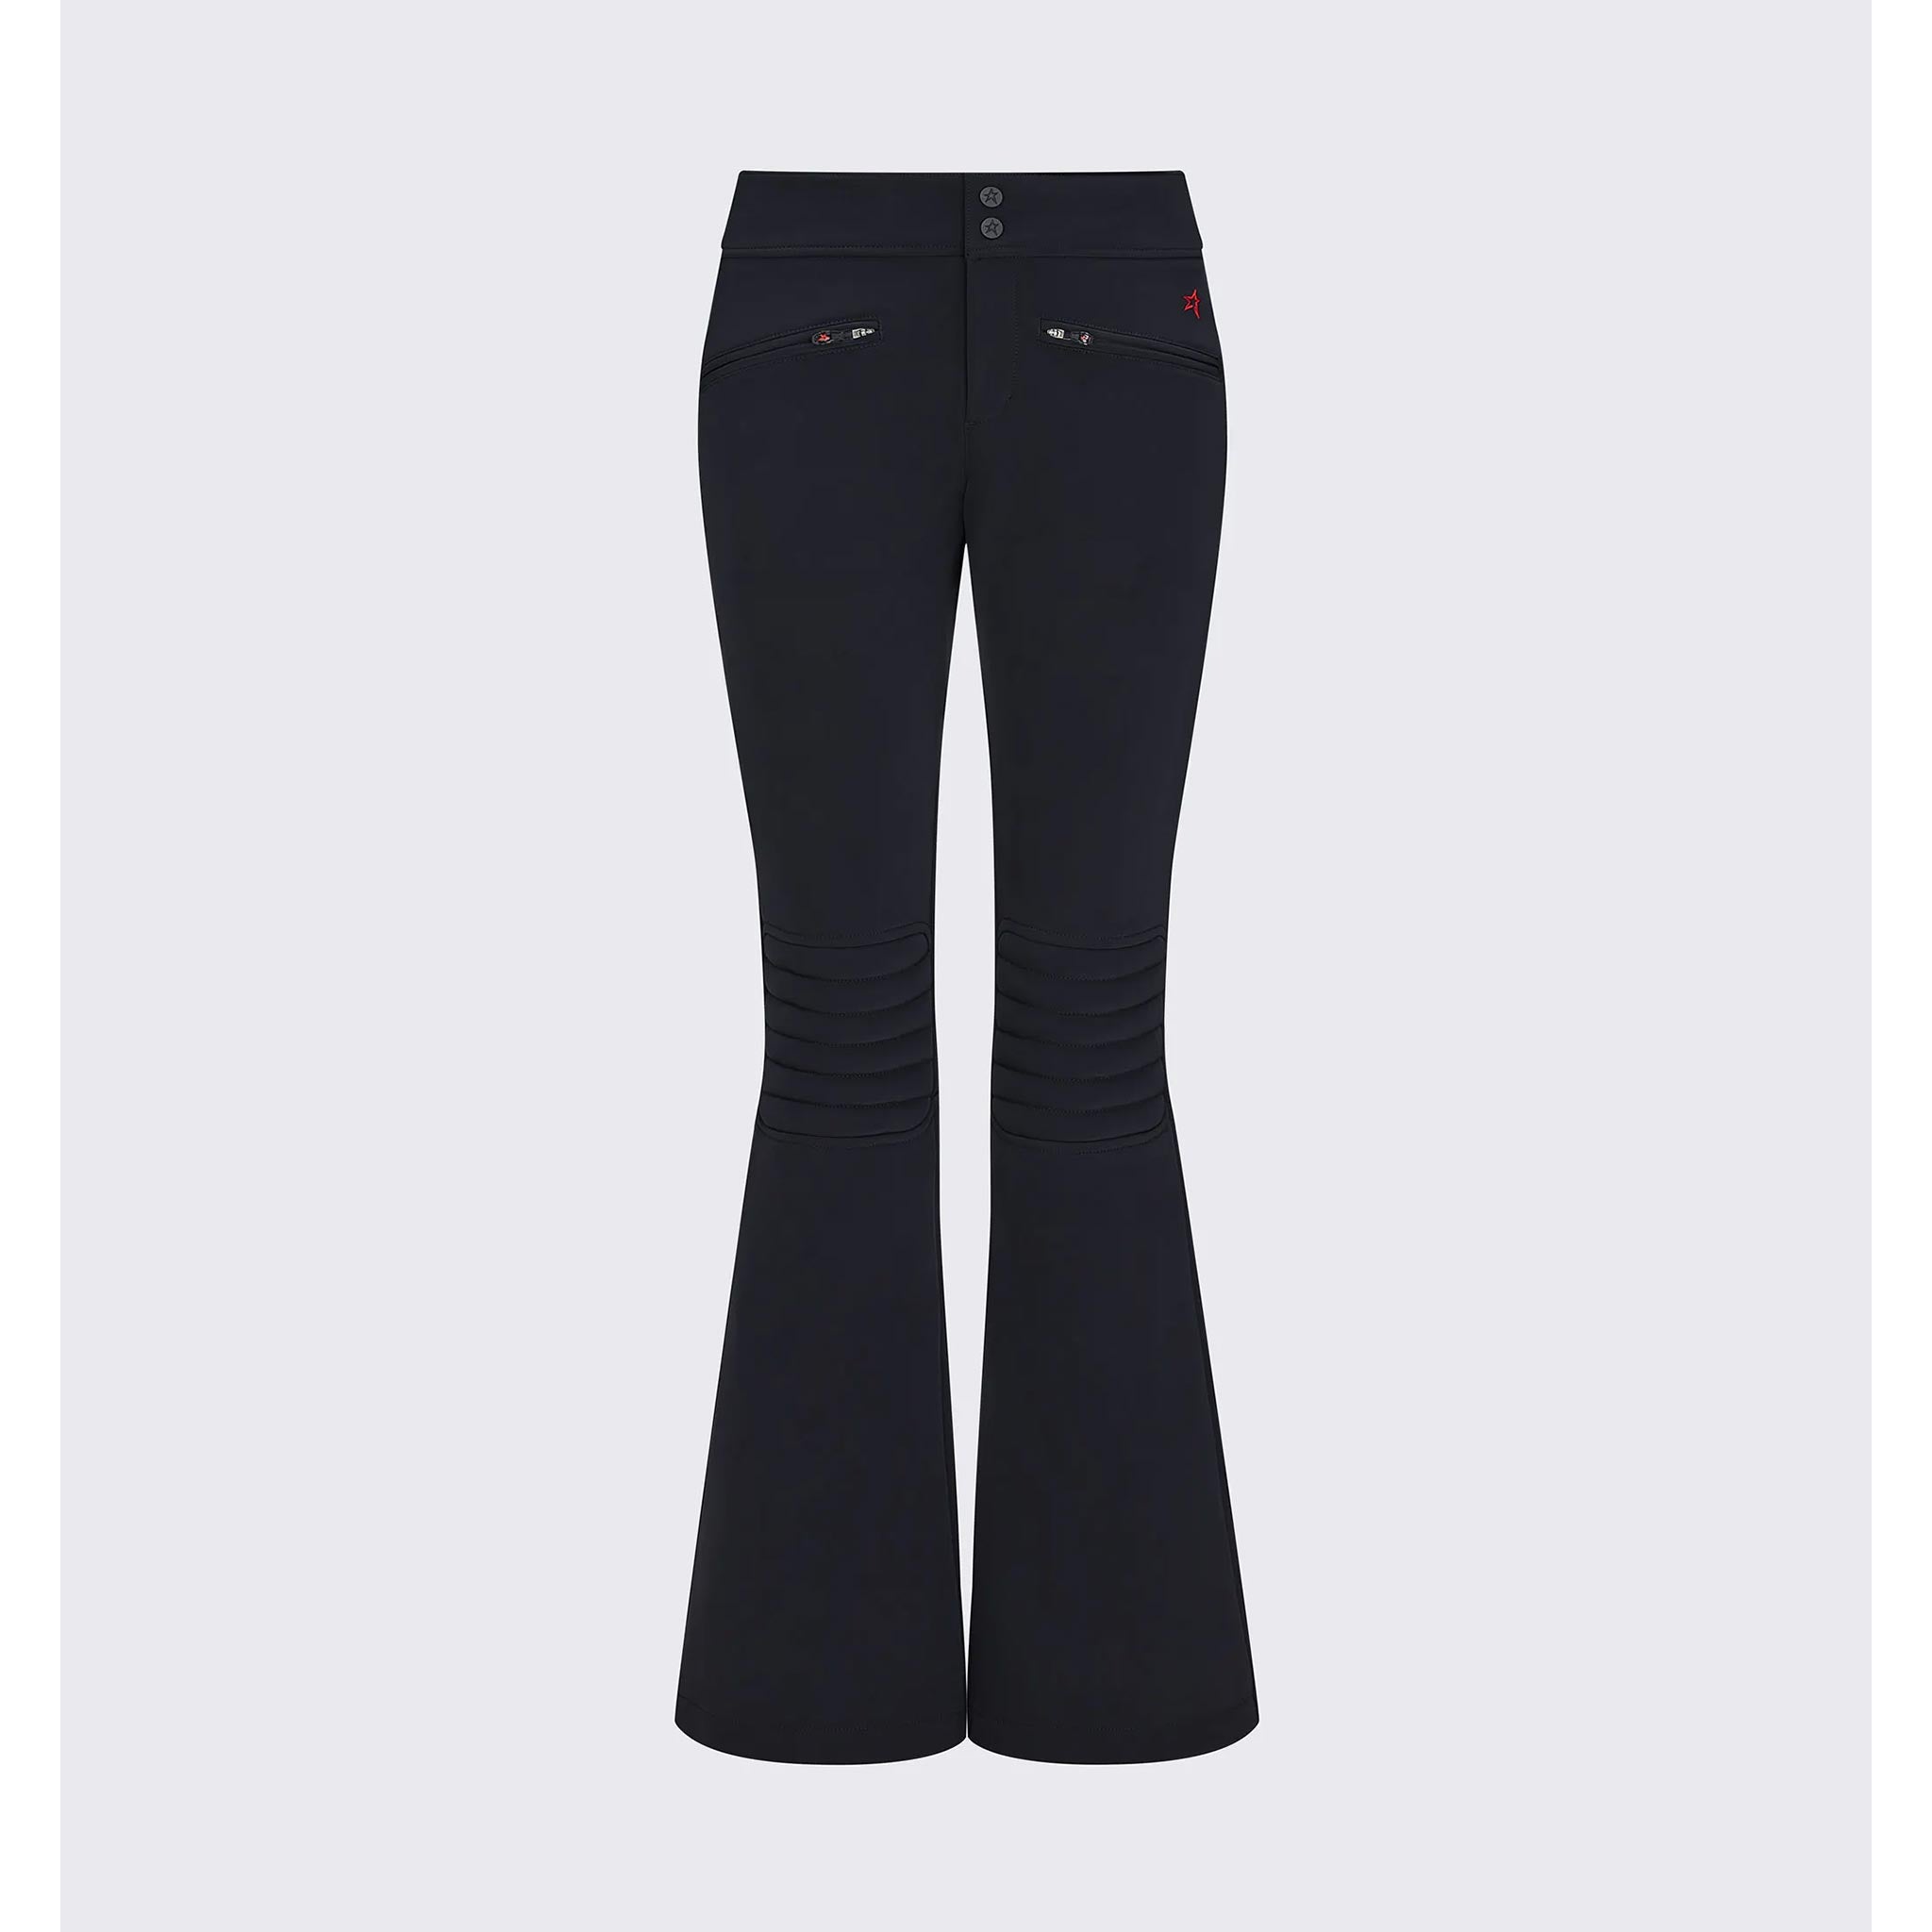 Aurora Flare Pant in Black by Perfect Moment